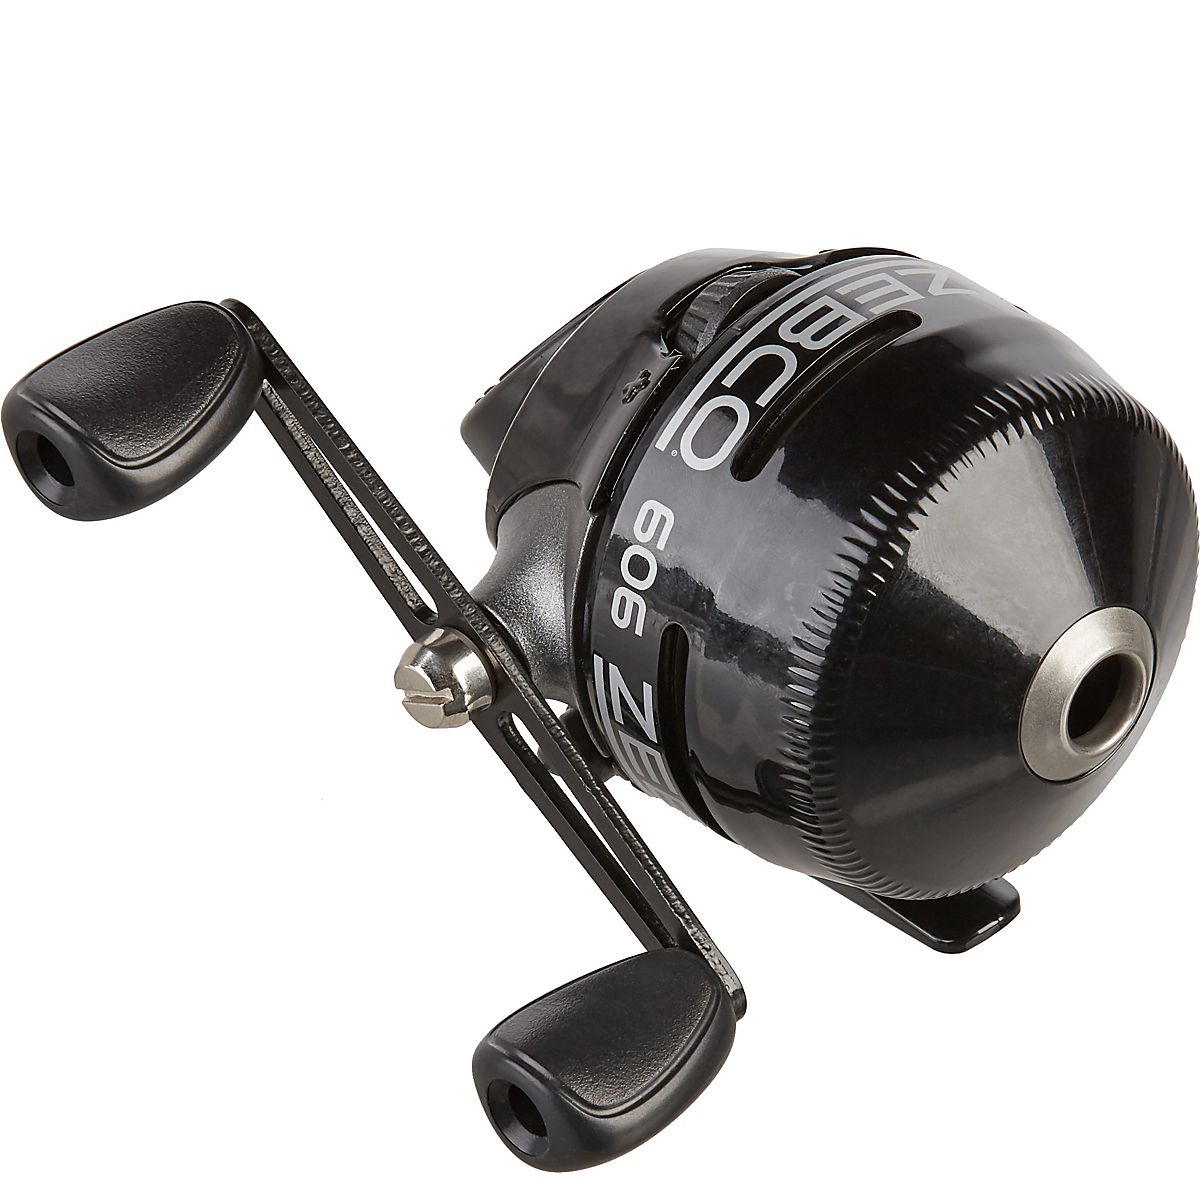 Zebco 606 Spincast Reel  Free Shipping at Academy